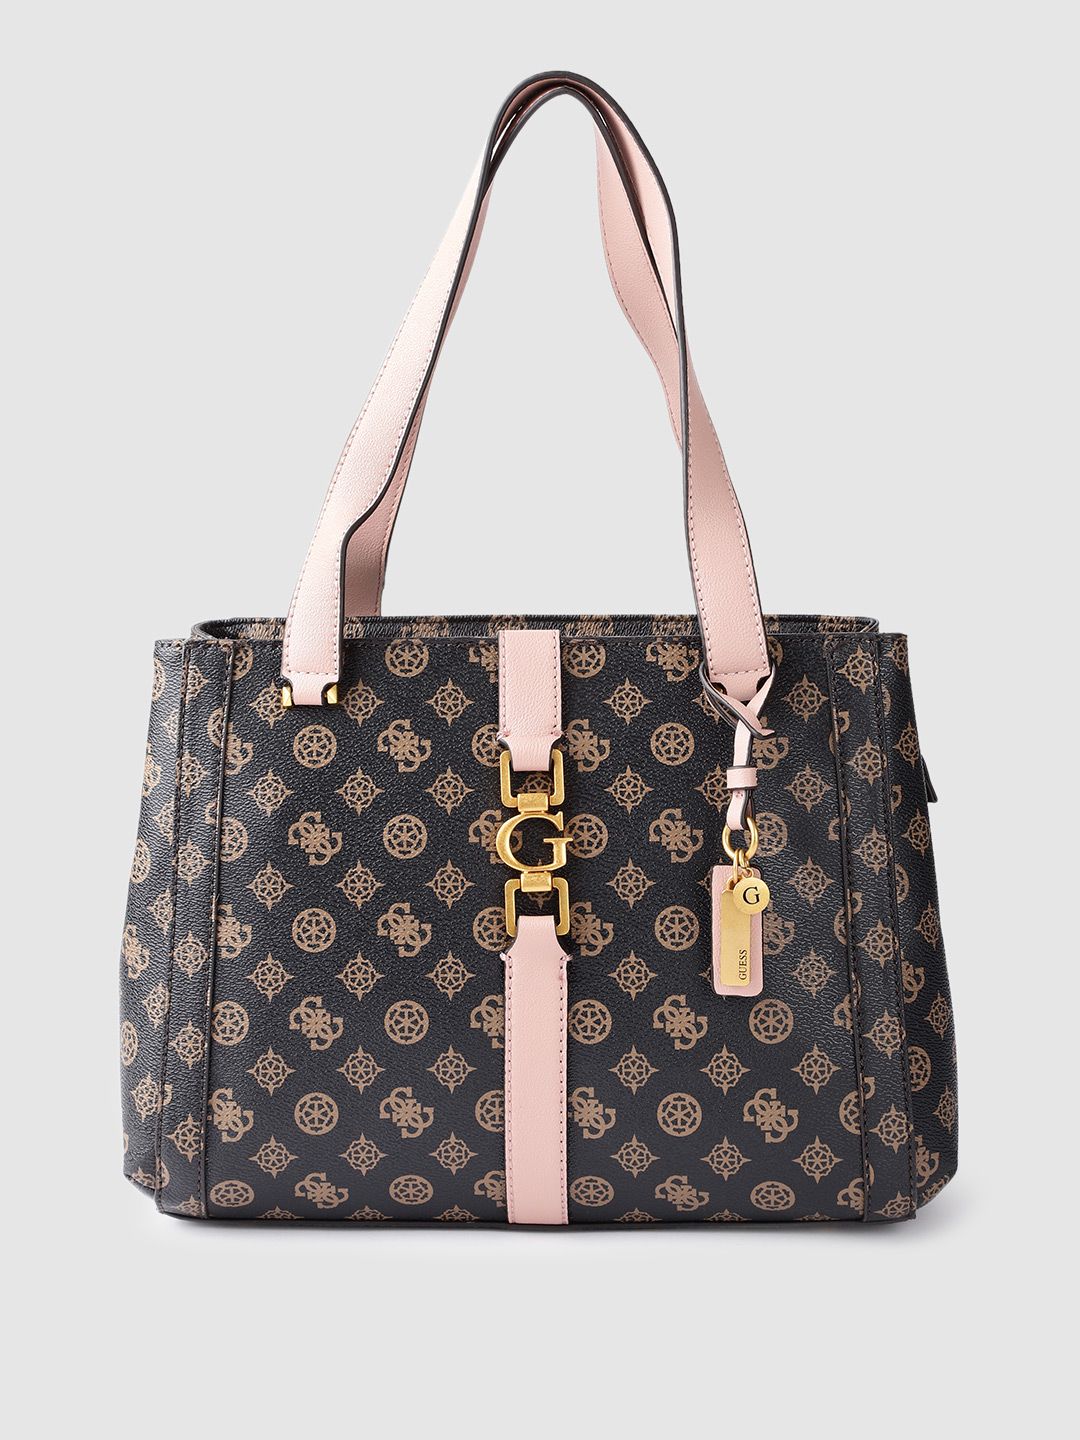 GUESS Brown Ethnic Motifs Printed Shoulder Bag with Tab & Buckle Detail Price in India